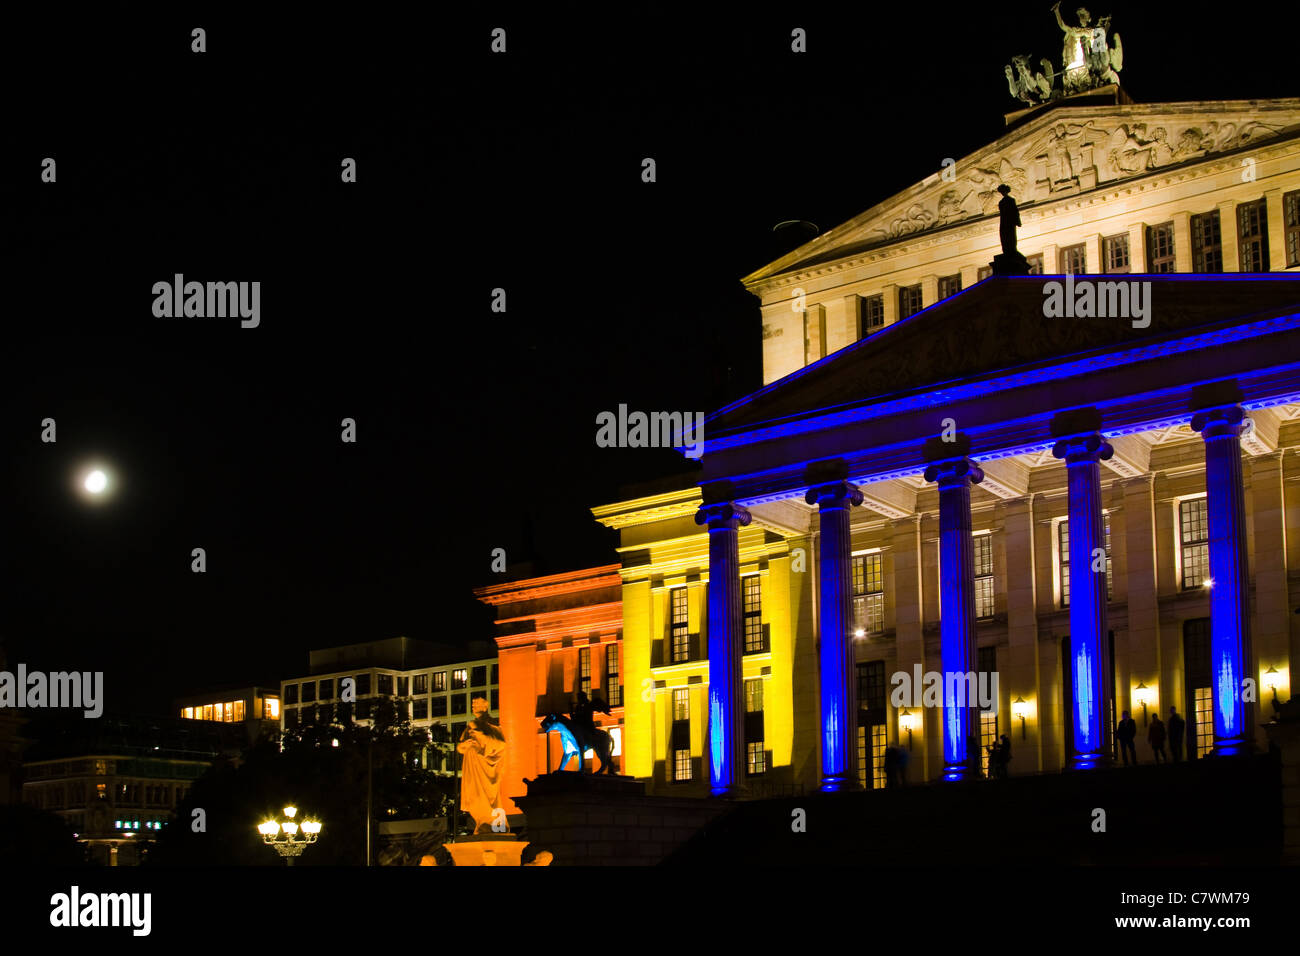 Image taken at night of the Concert Hall at the Gendarmenmarkt during the Festival of Lights in Berlin in October 2010. Stock Photo